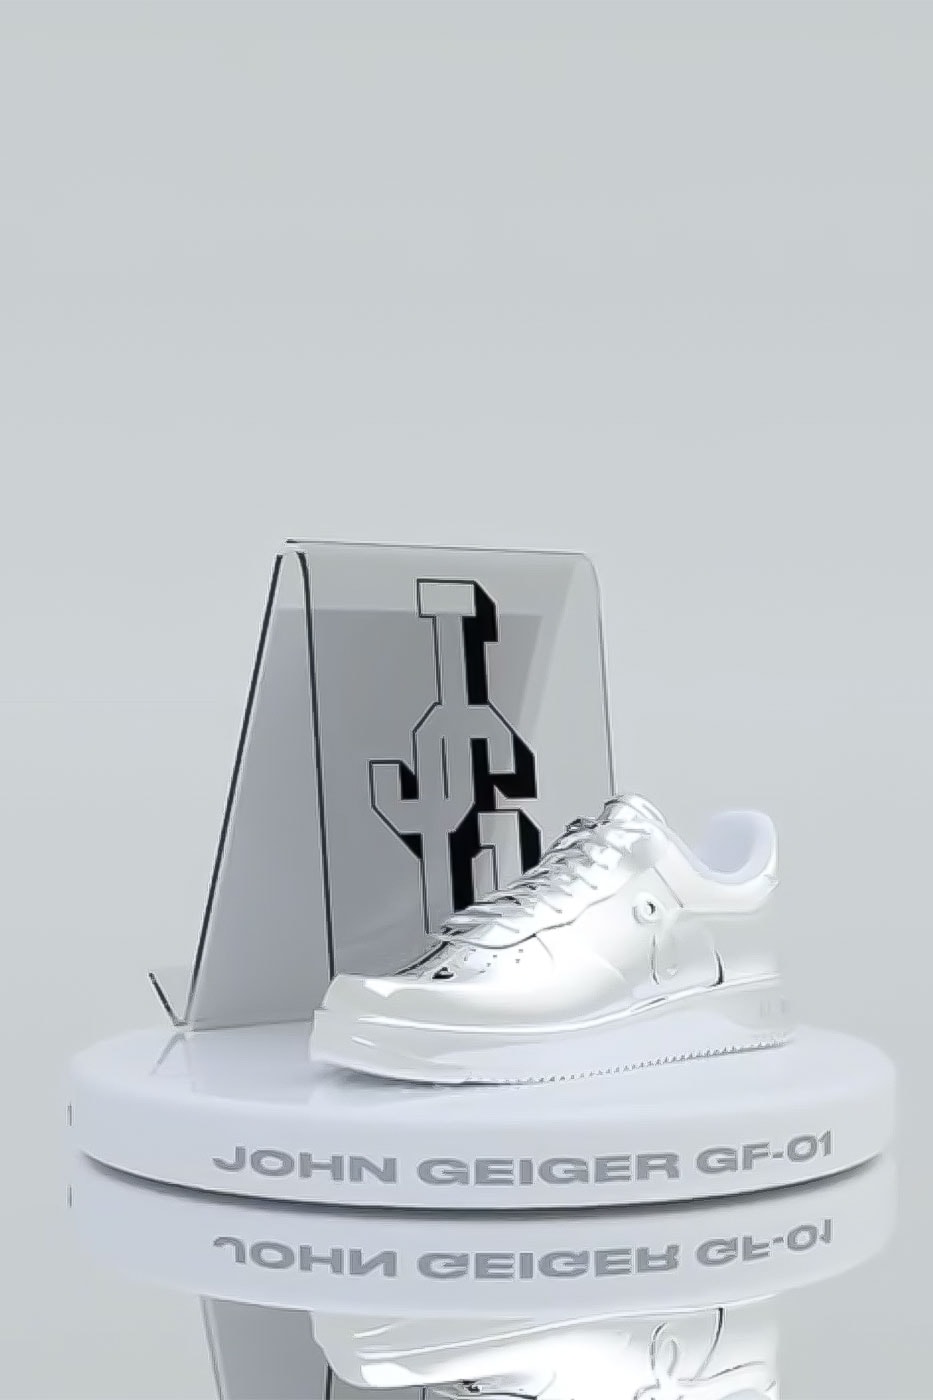 John geiger first nft gold silver bronze nike lawsuit gf-01 sneaker gold silver bronze signed papers physical art piece digital collectible release info discord